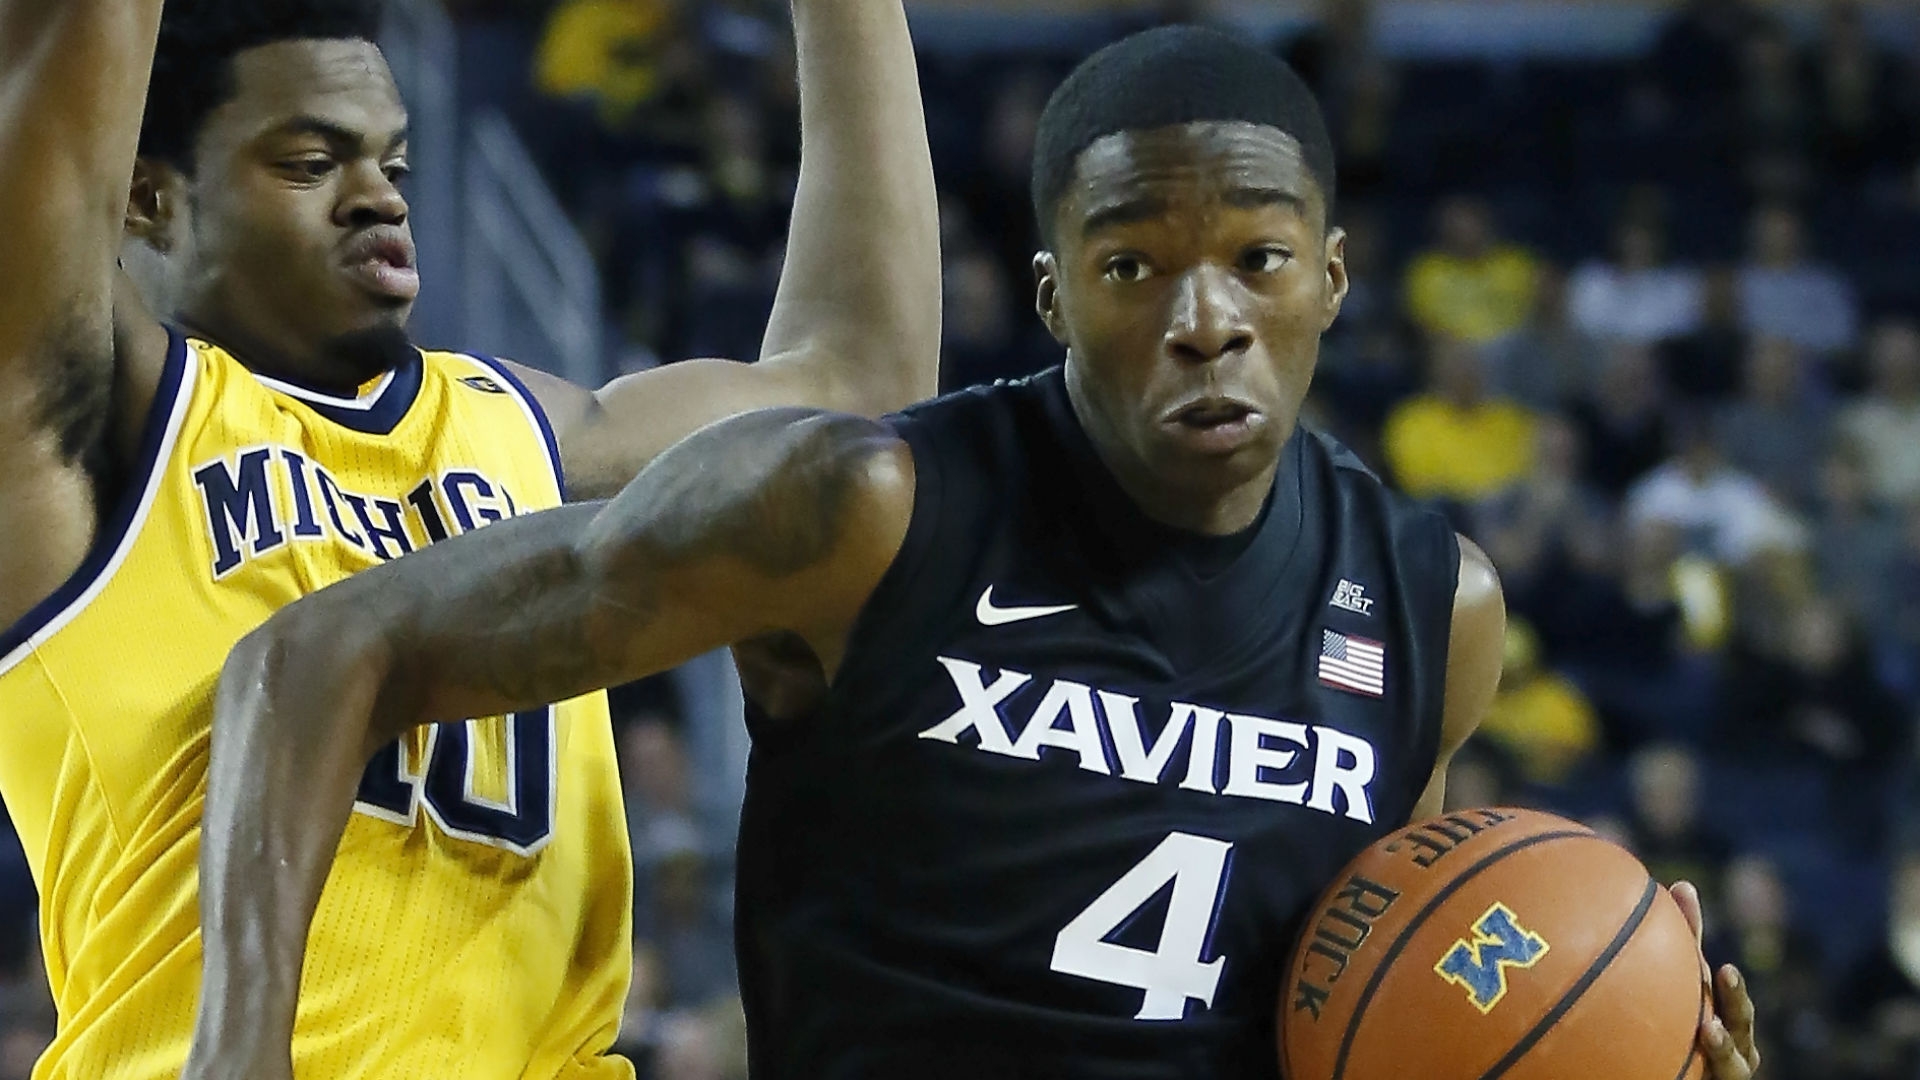 Xavier's Edmond Sumner leaves game on stretcher after scary fall